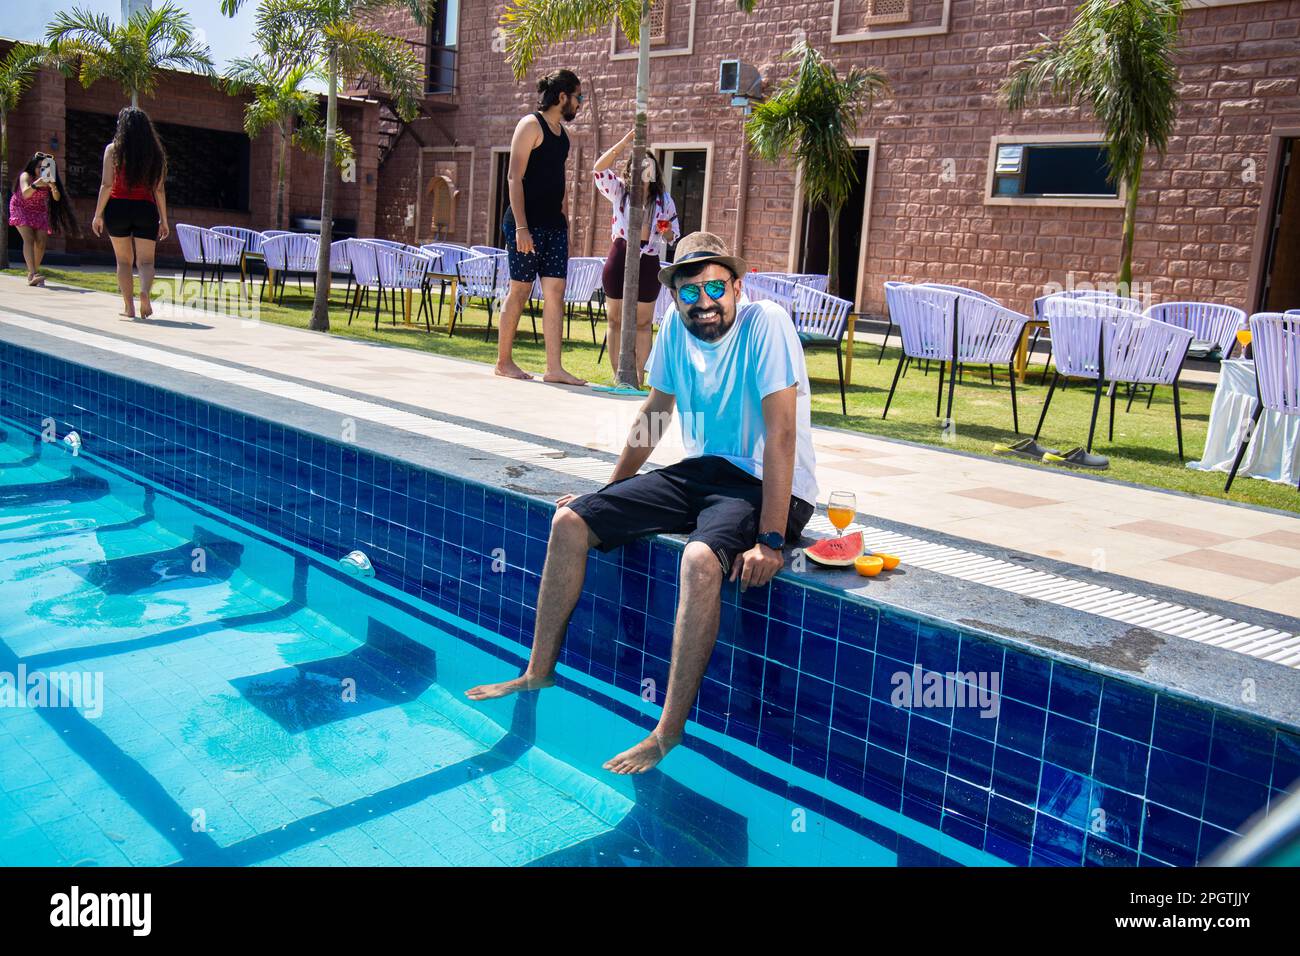 Young indian man sitting on the pool edge with feet in water and holding glass of orange juice in hot sunny day. Guy relaxing outdoors by swimming poo Stock Photo